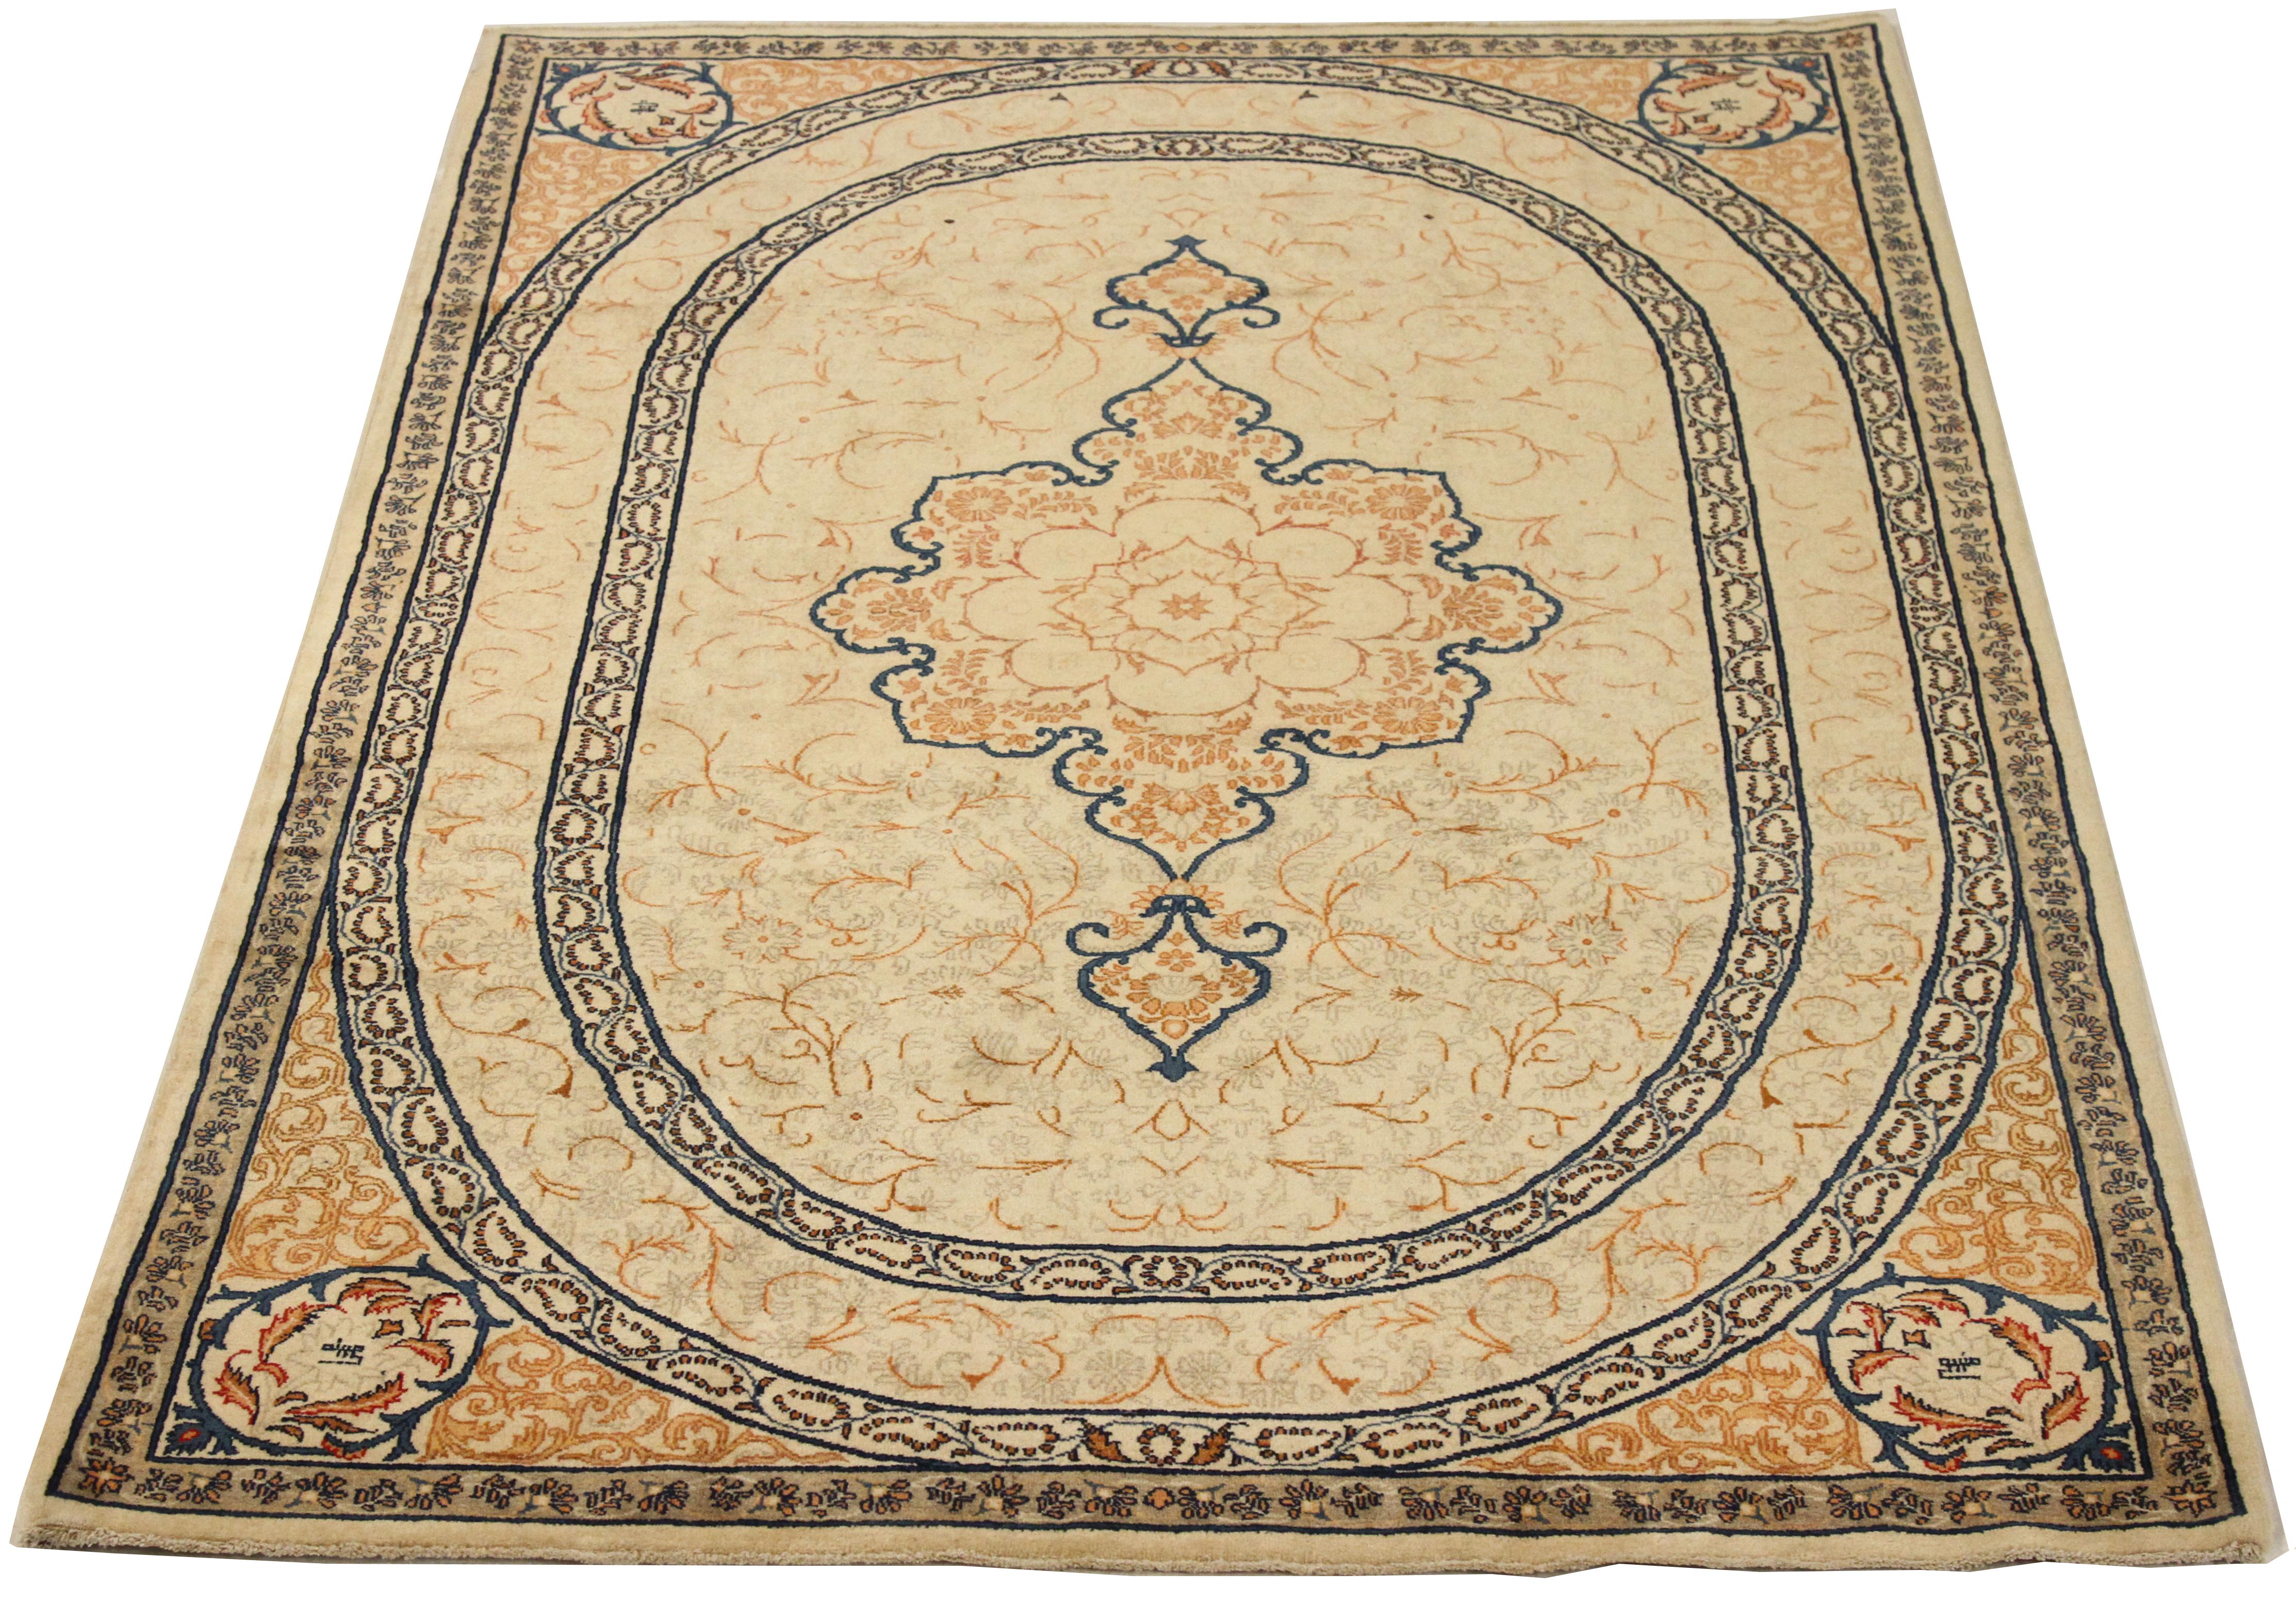 Antique mid-20th century hand-woven Persian area rug made from fine wool and all-natural vegetable dyes that are safe for people and pets. It features traditional Kashan weaving depicting intricate floral and botanical patterns often in bold colors.